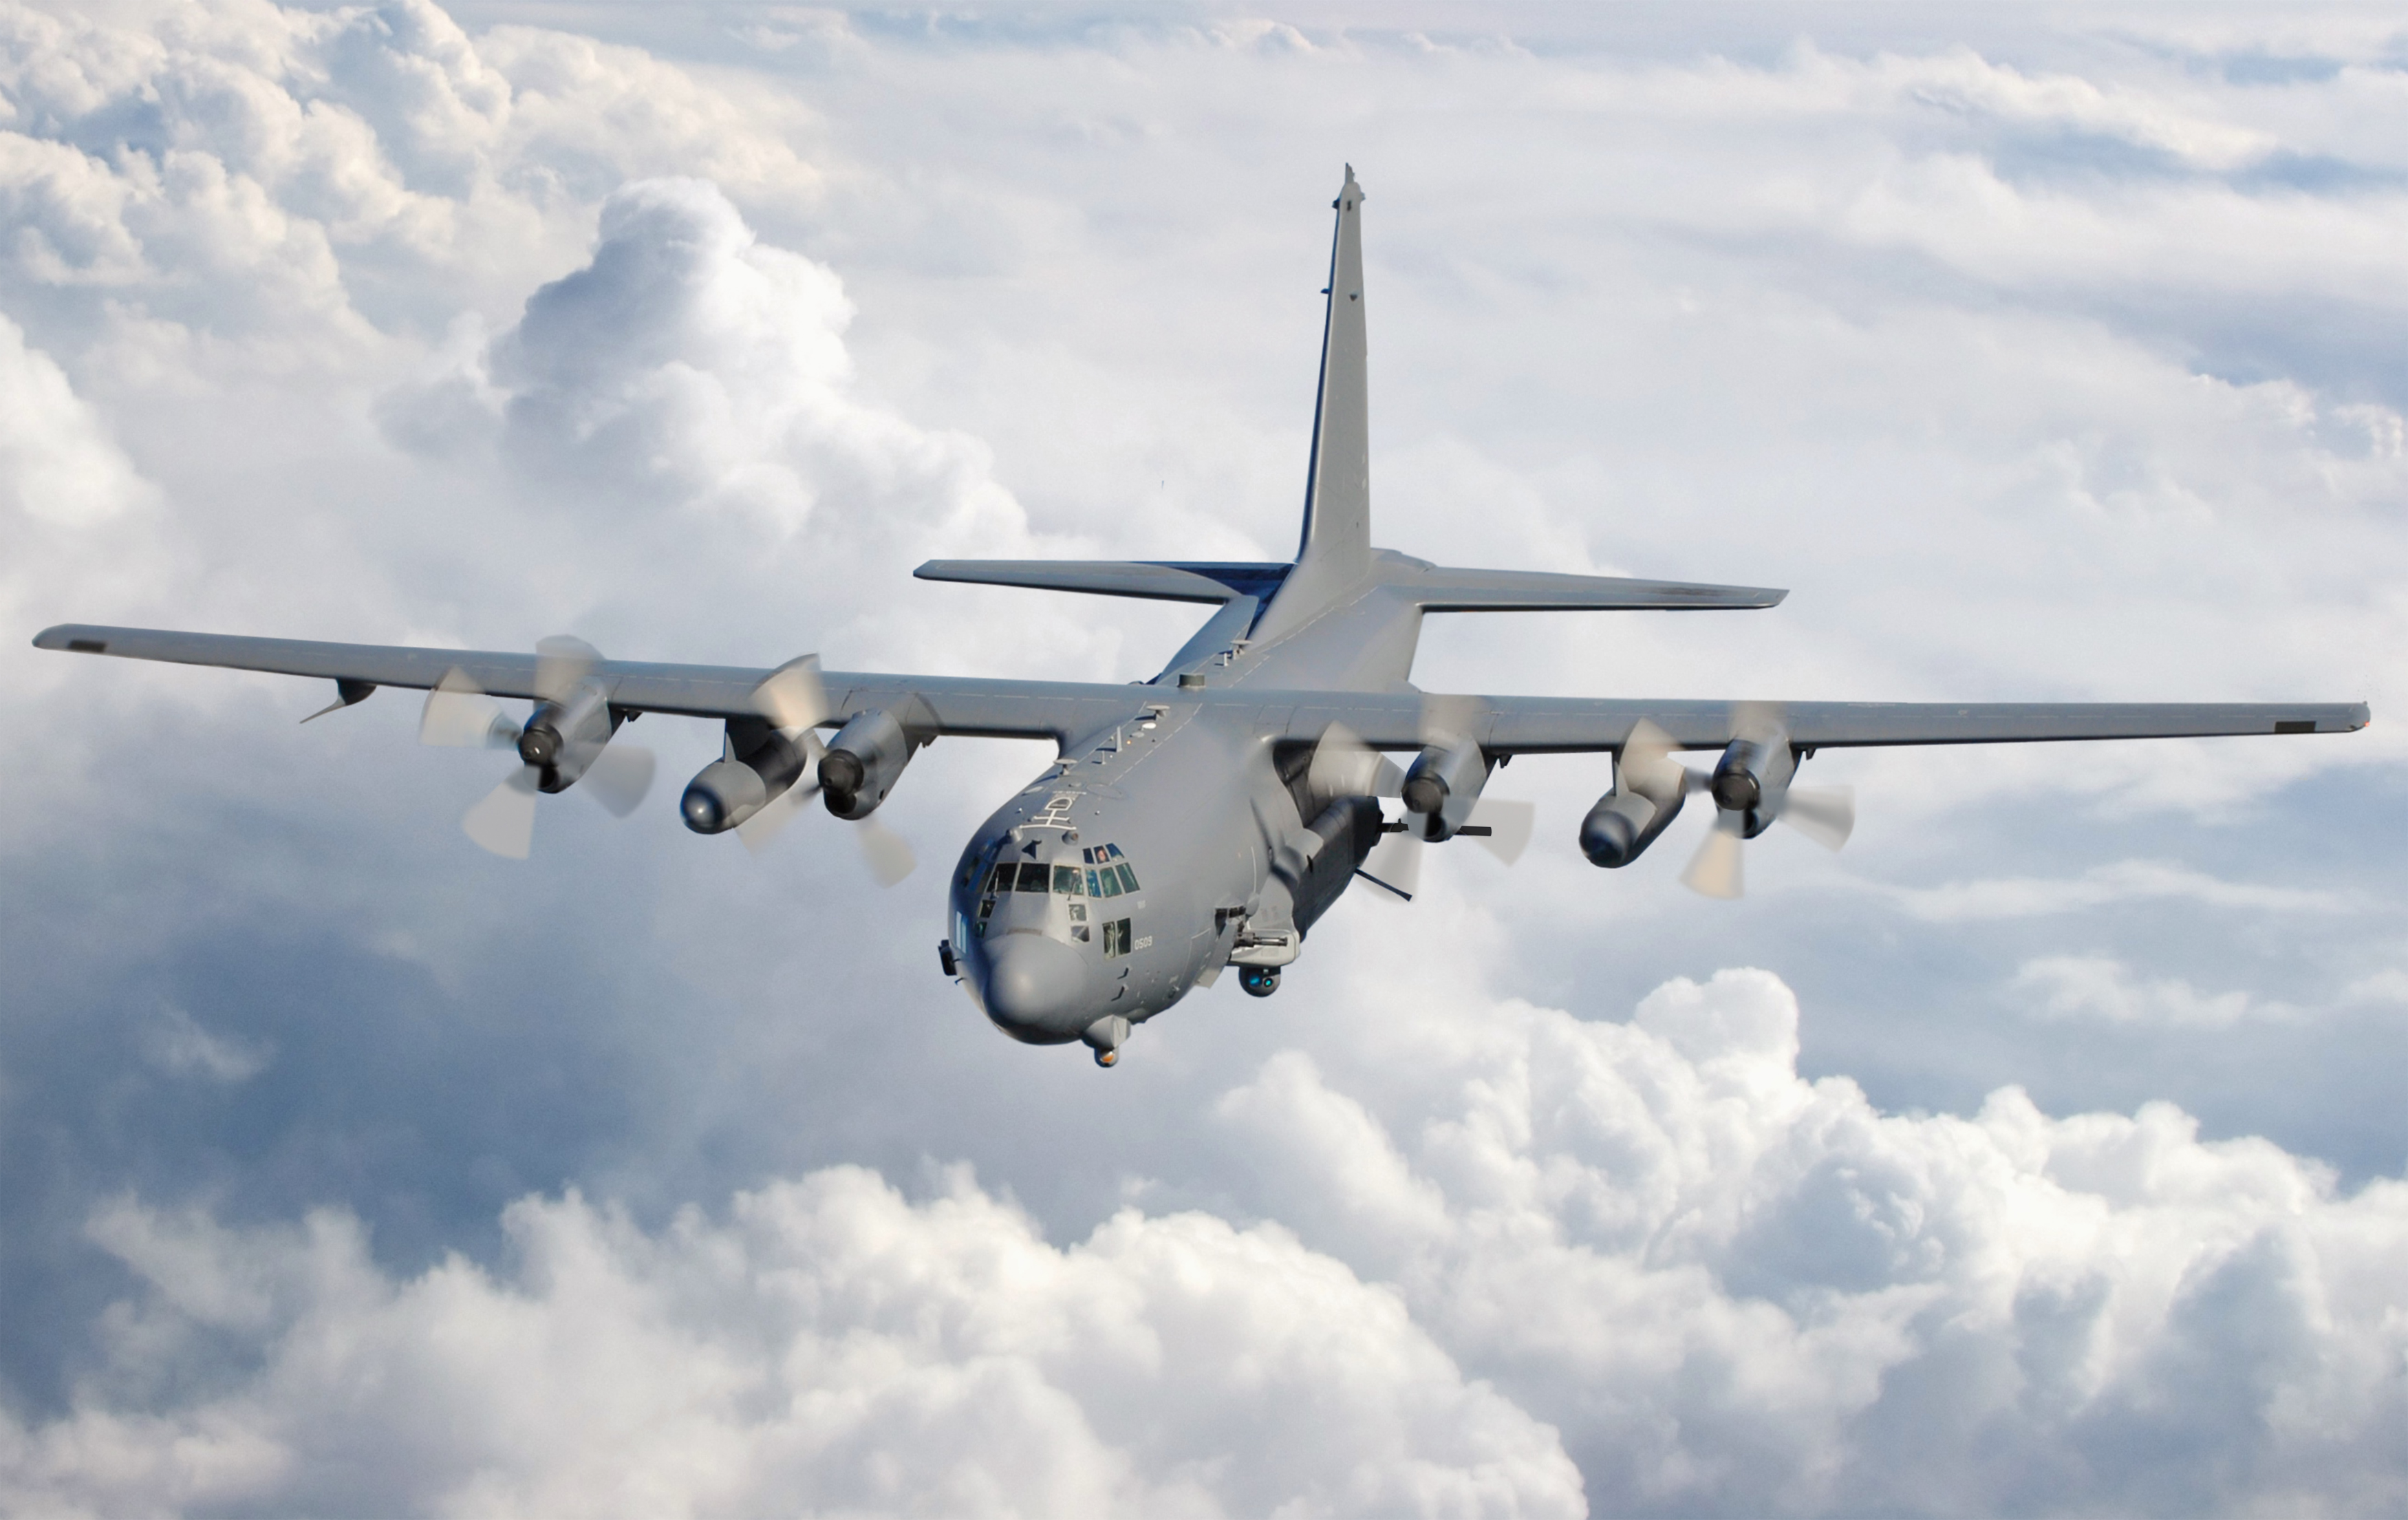 AC-130U_gunship_from_the_4th_Special_Operations_Squadron.jpg